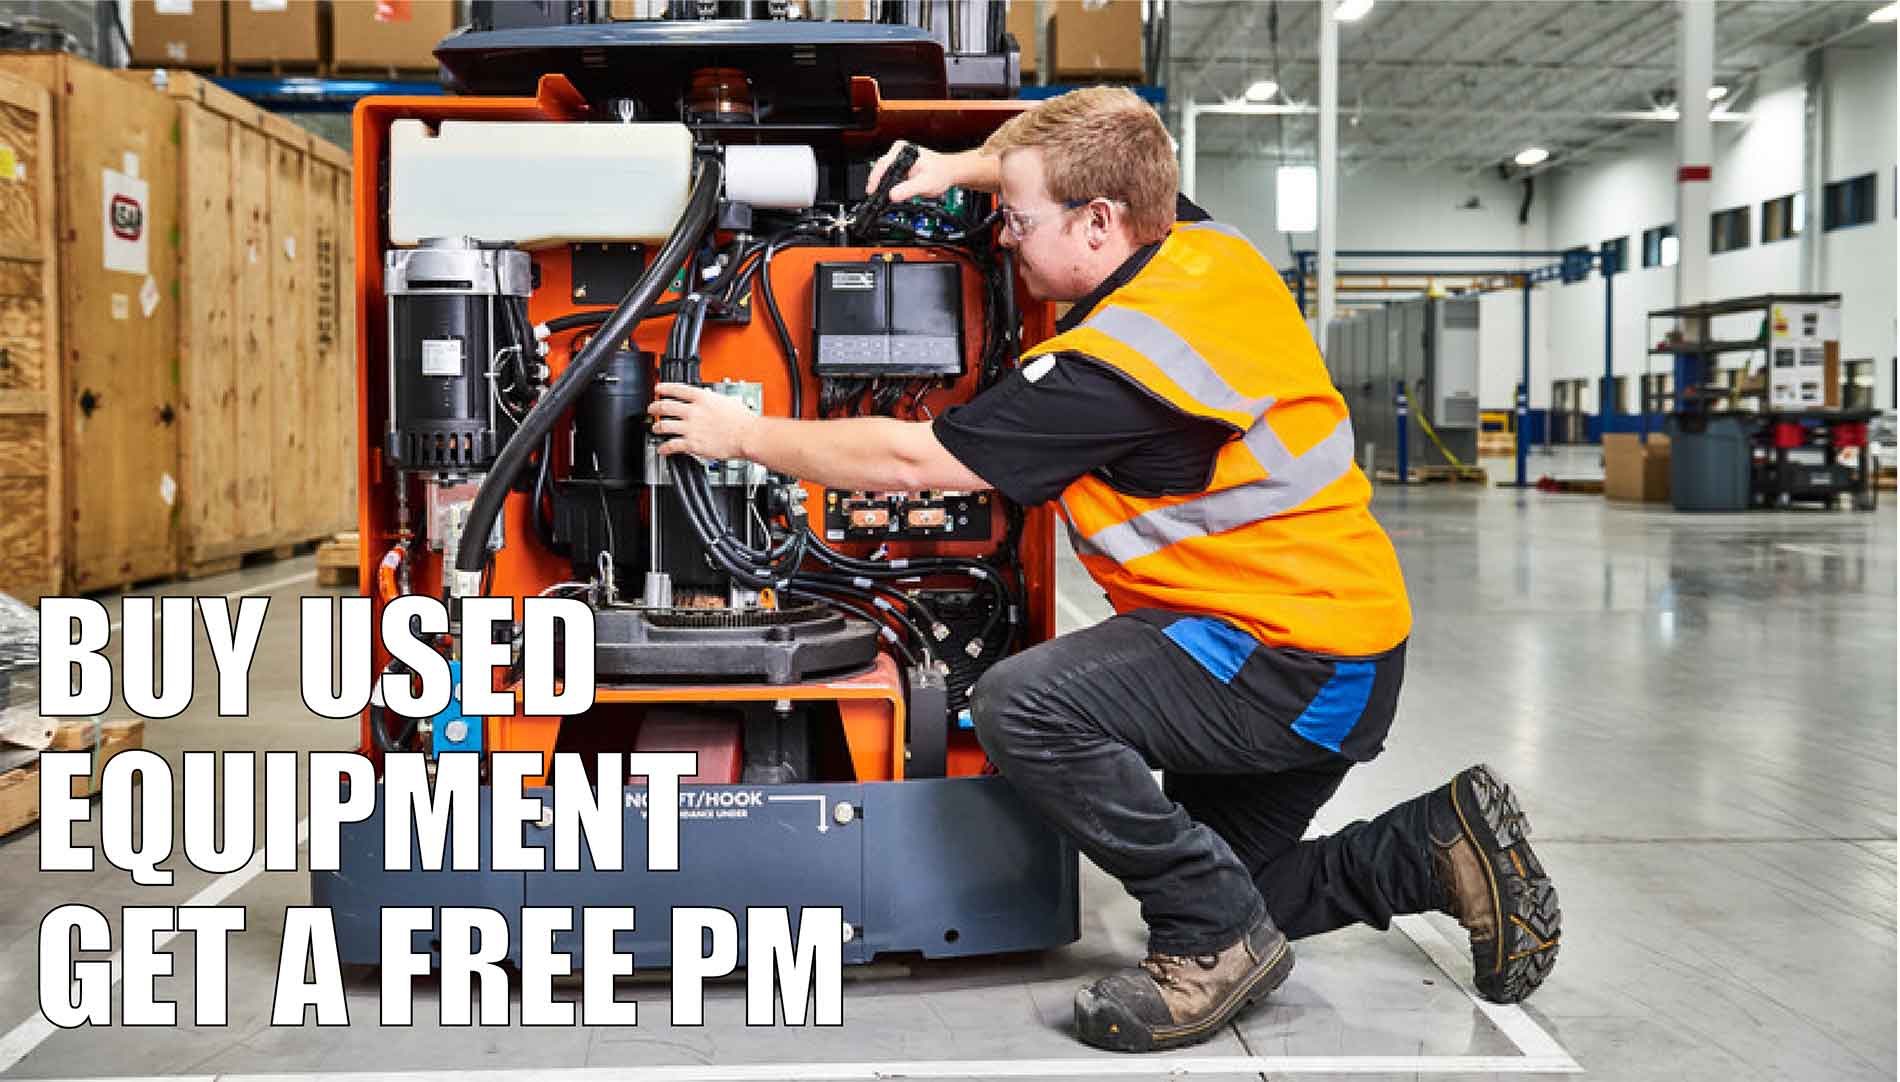 Blog post - Score a Free PM with Your Used Equipment Buy